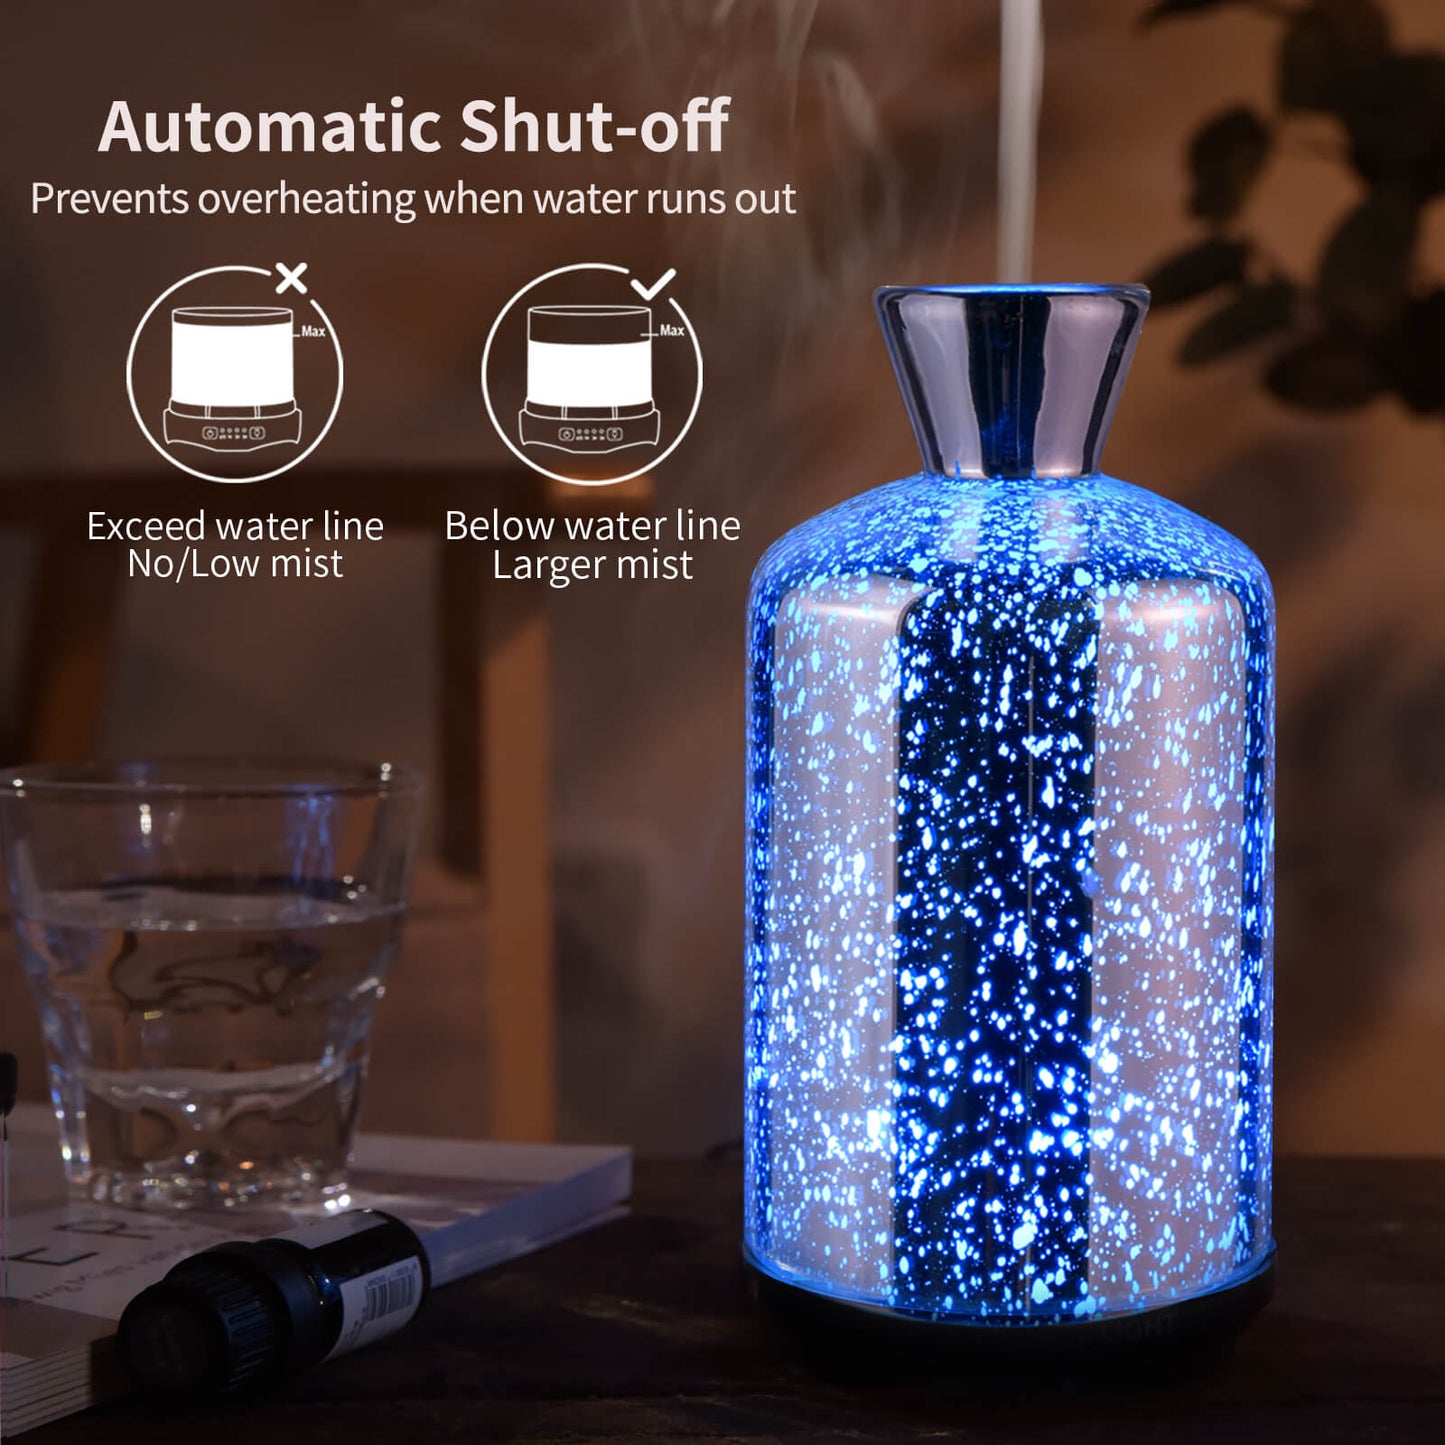 Essential Oil Diffuser Glass Aromatherapy Ultrasonic Humidifier, Auto Shut-Off BPA Free, Aroma Decoration for Home,Office,Gym,Spa,Premium Gift 100ML